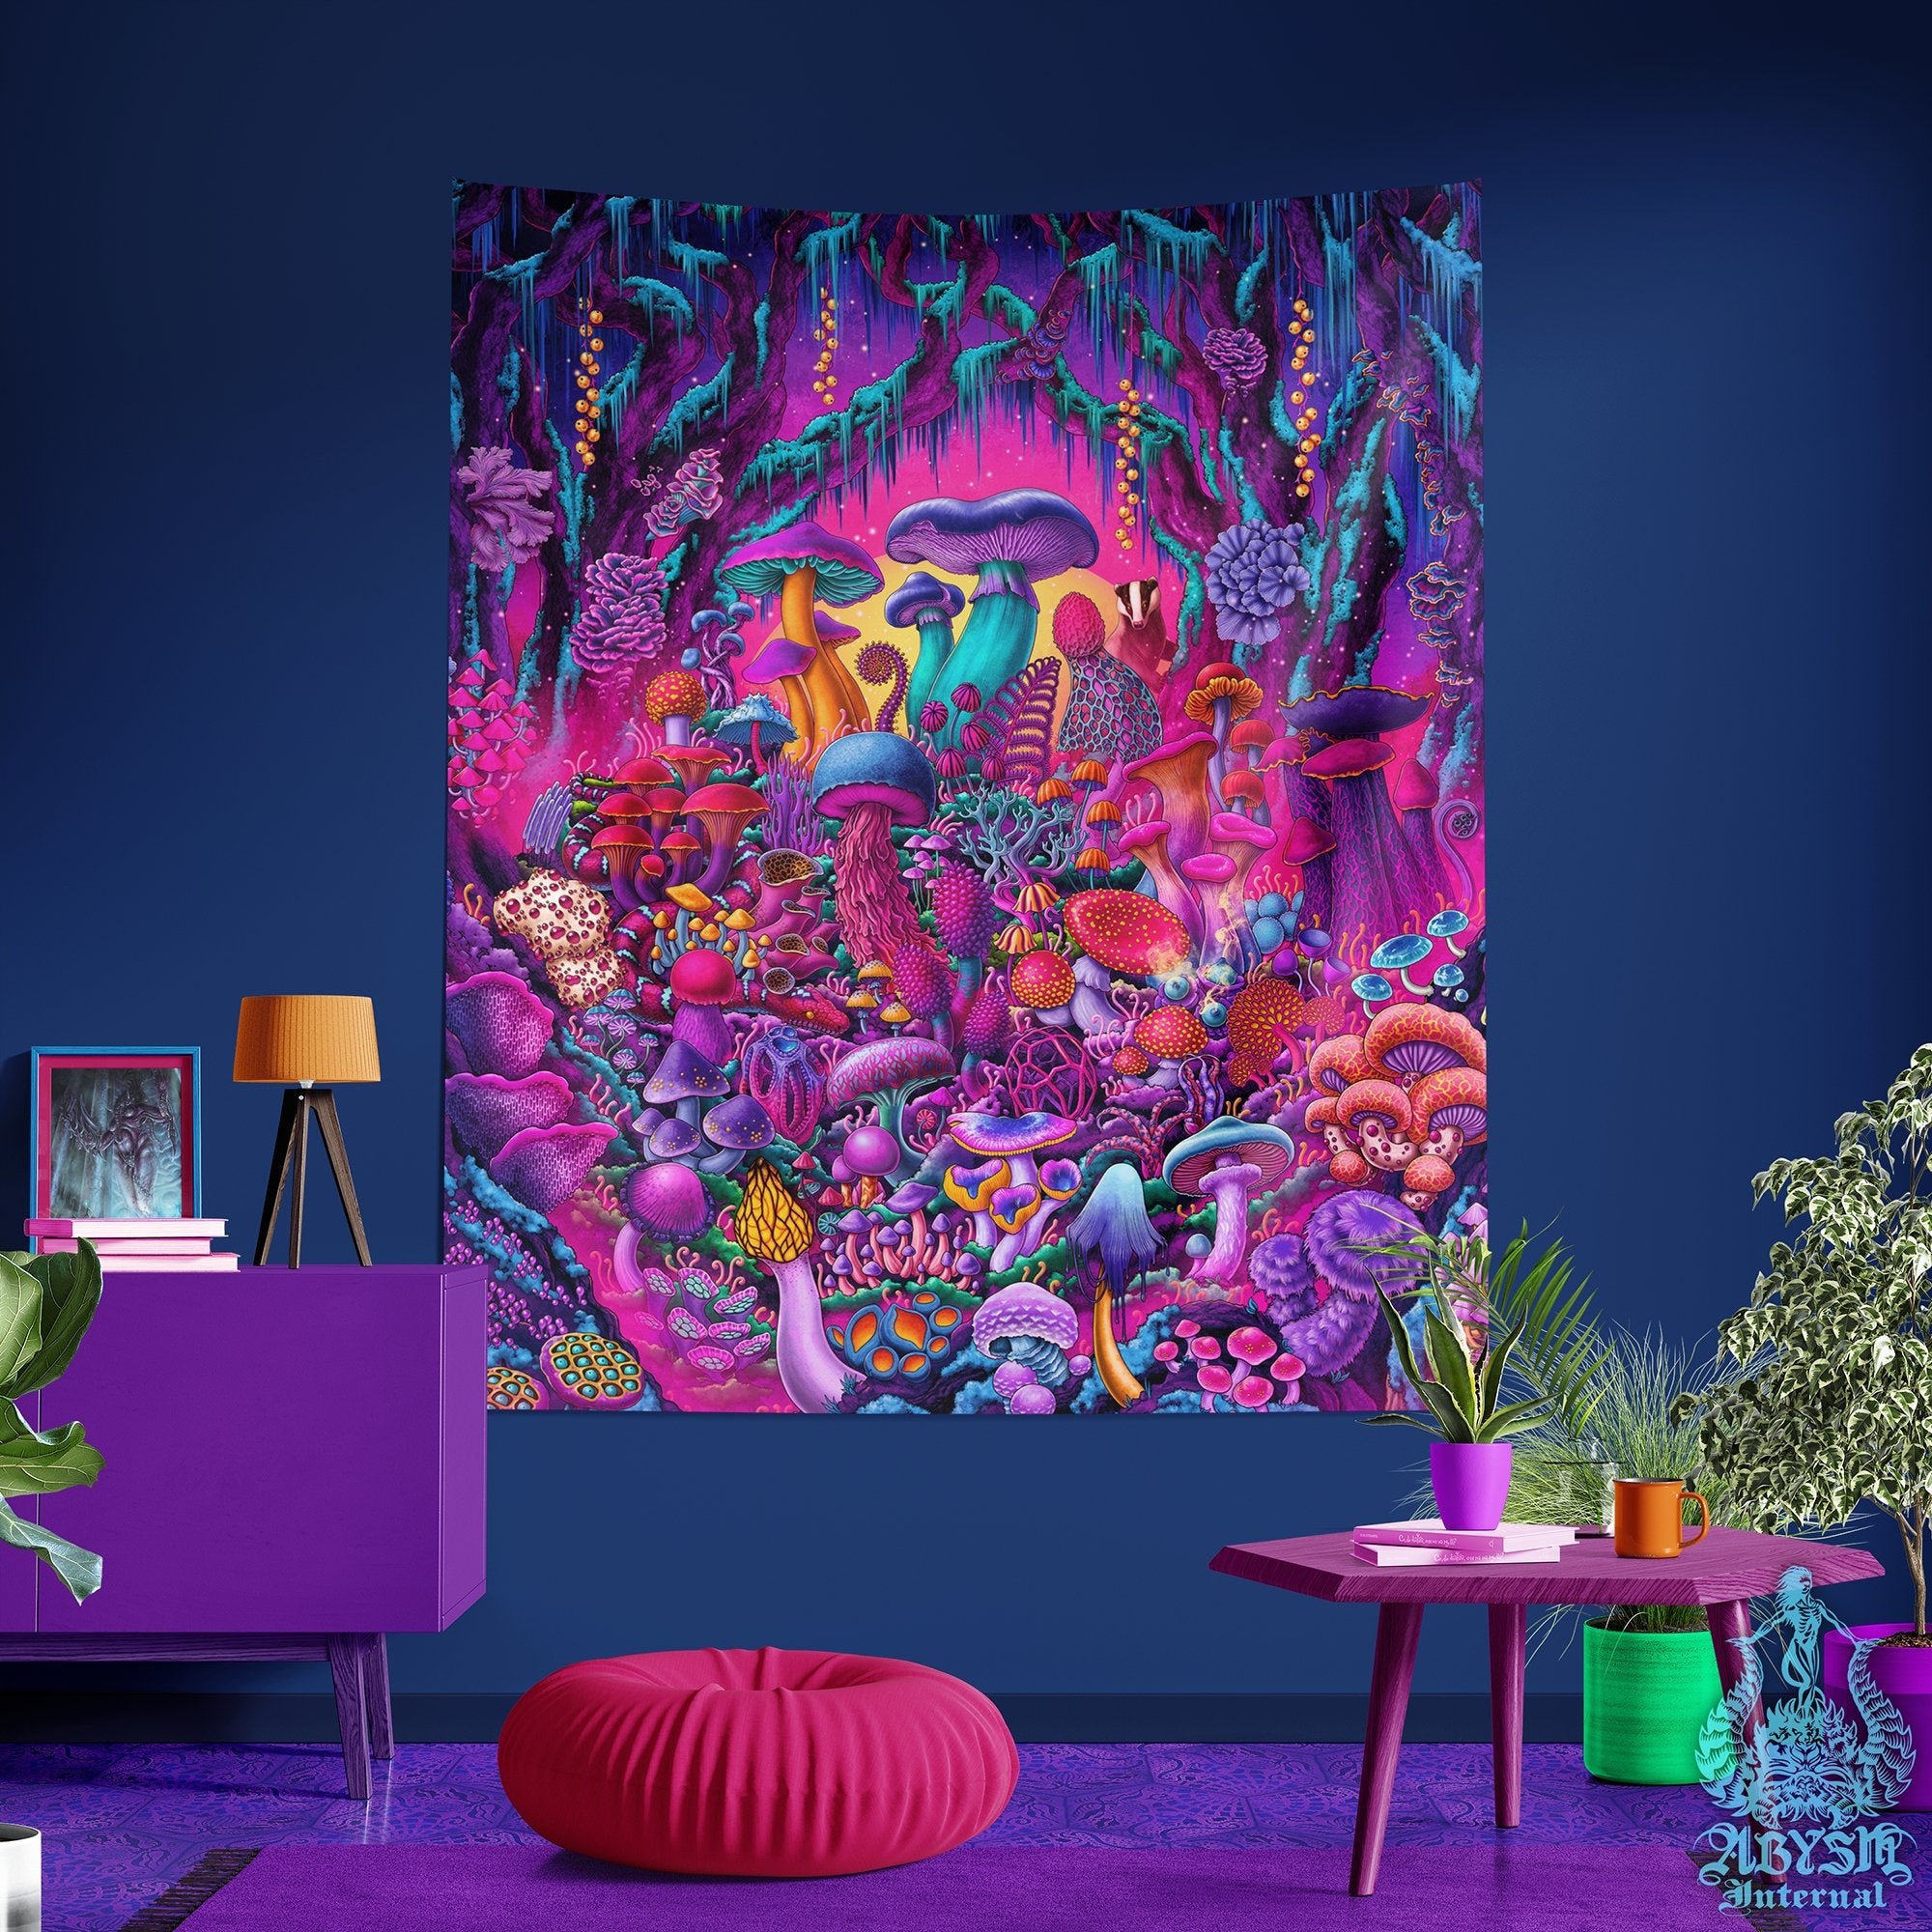 Psychedelic Mushrooms Tapestry, Magic Shrooms Wall Hanging, Vaporwave and Retrowave 80s Home Decor, Synthwave Art Print, Kids Room - Abysm Internal